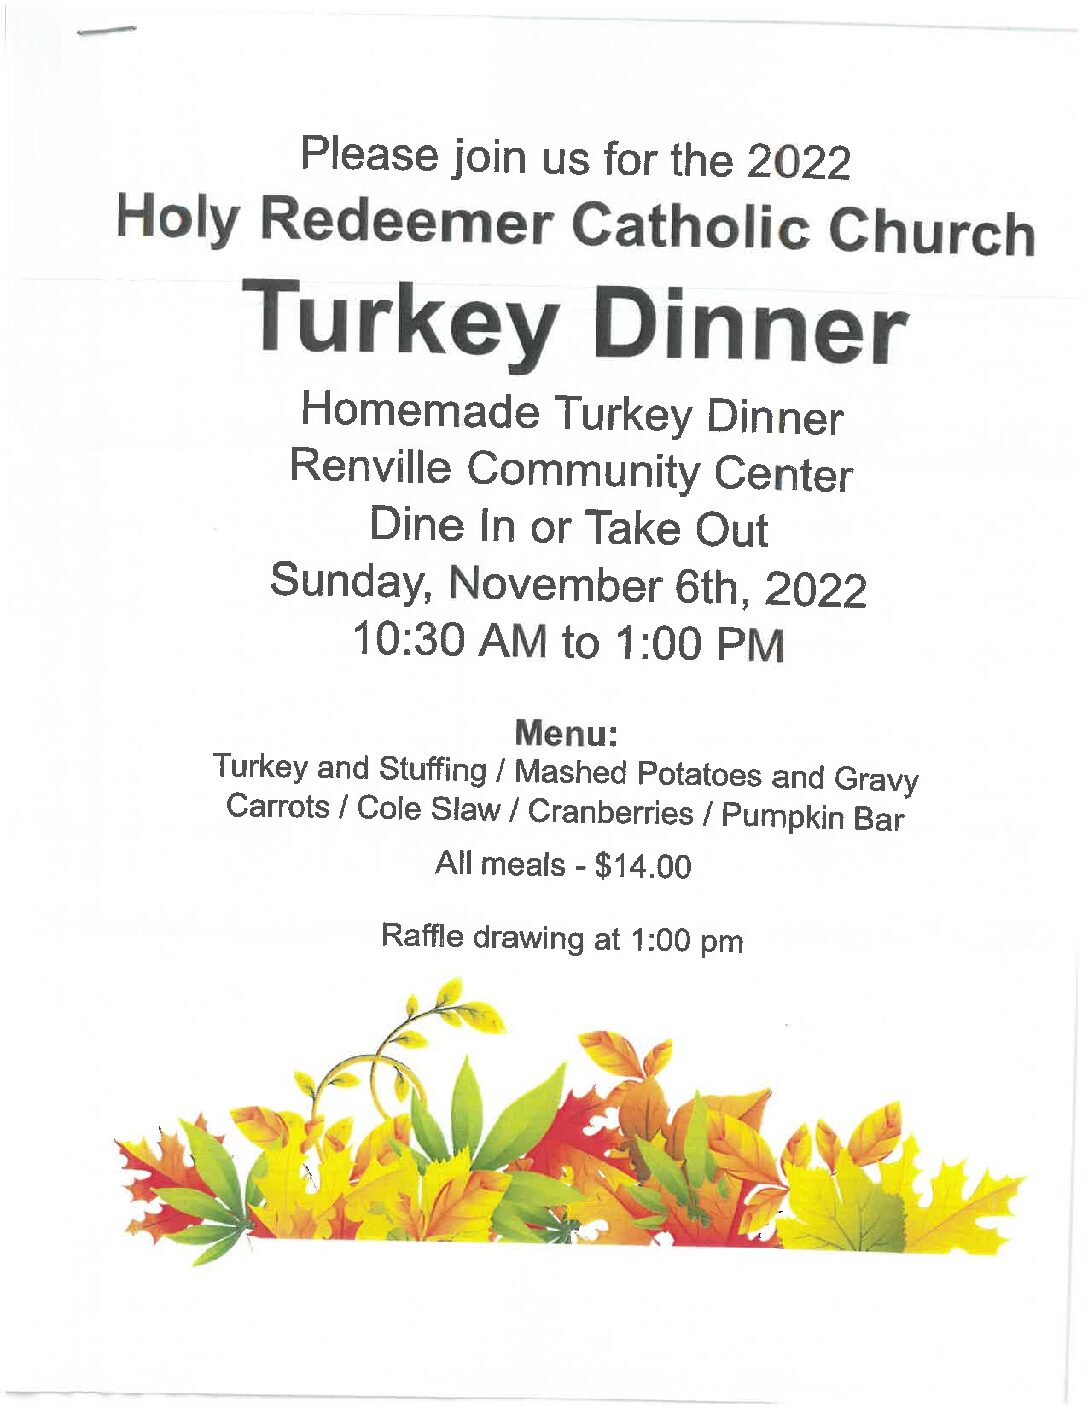 <h1 class="tribe-events-single-event-title">Holy Redeemer Catholic Church Turkey Dinner</h1>